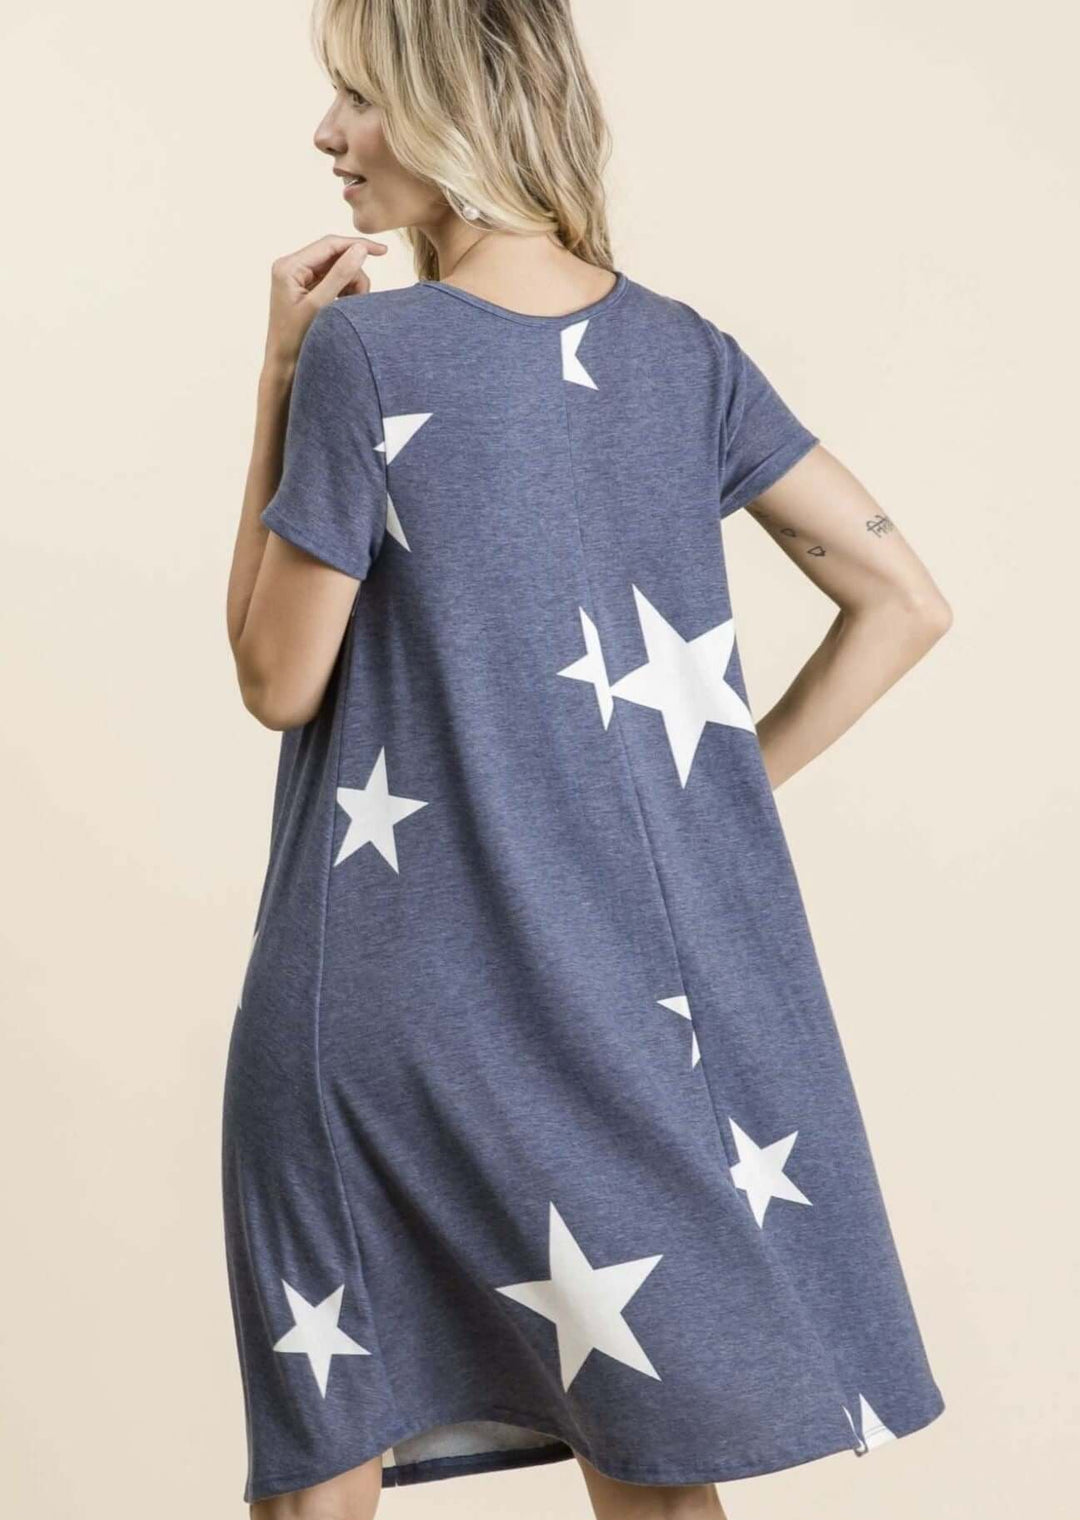 Made in USA Women's Flowy Star Print, Knee Length, Short Sleeves, Round Neckline Washed Navy with White Star Print, Relaxed Fit Dress 